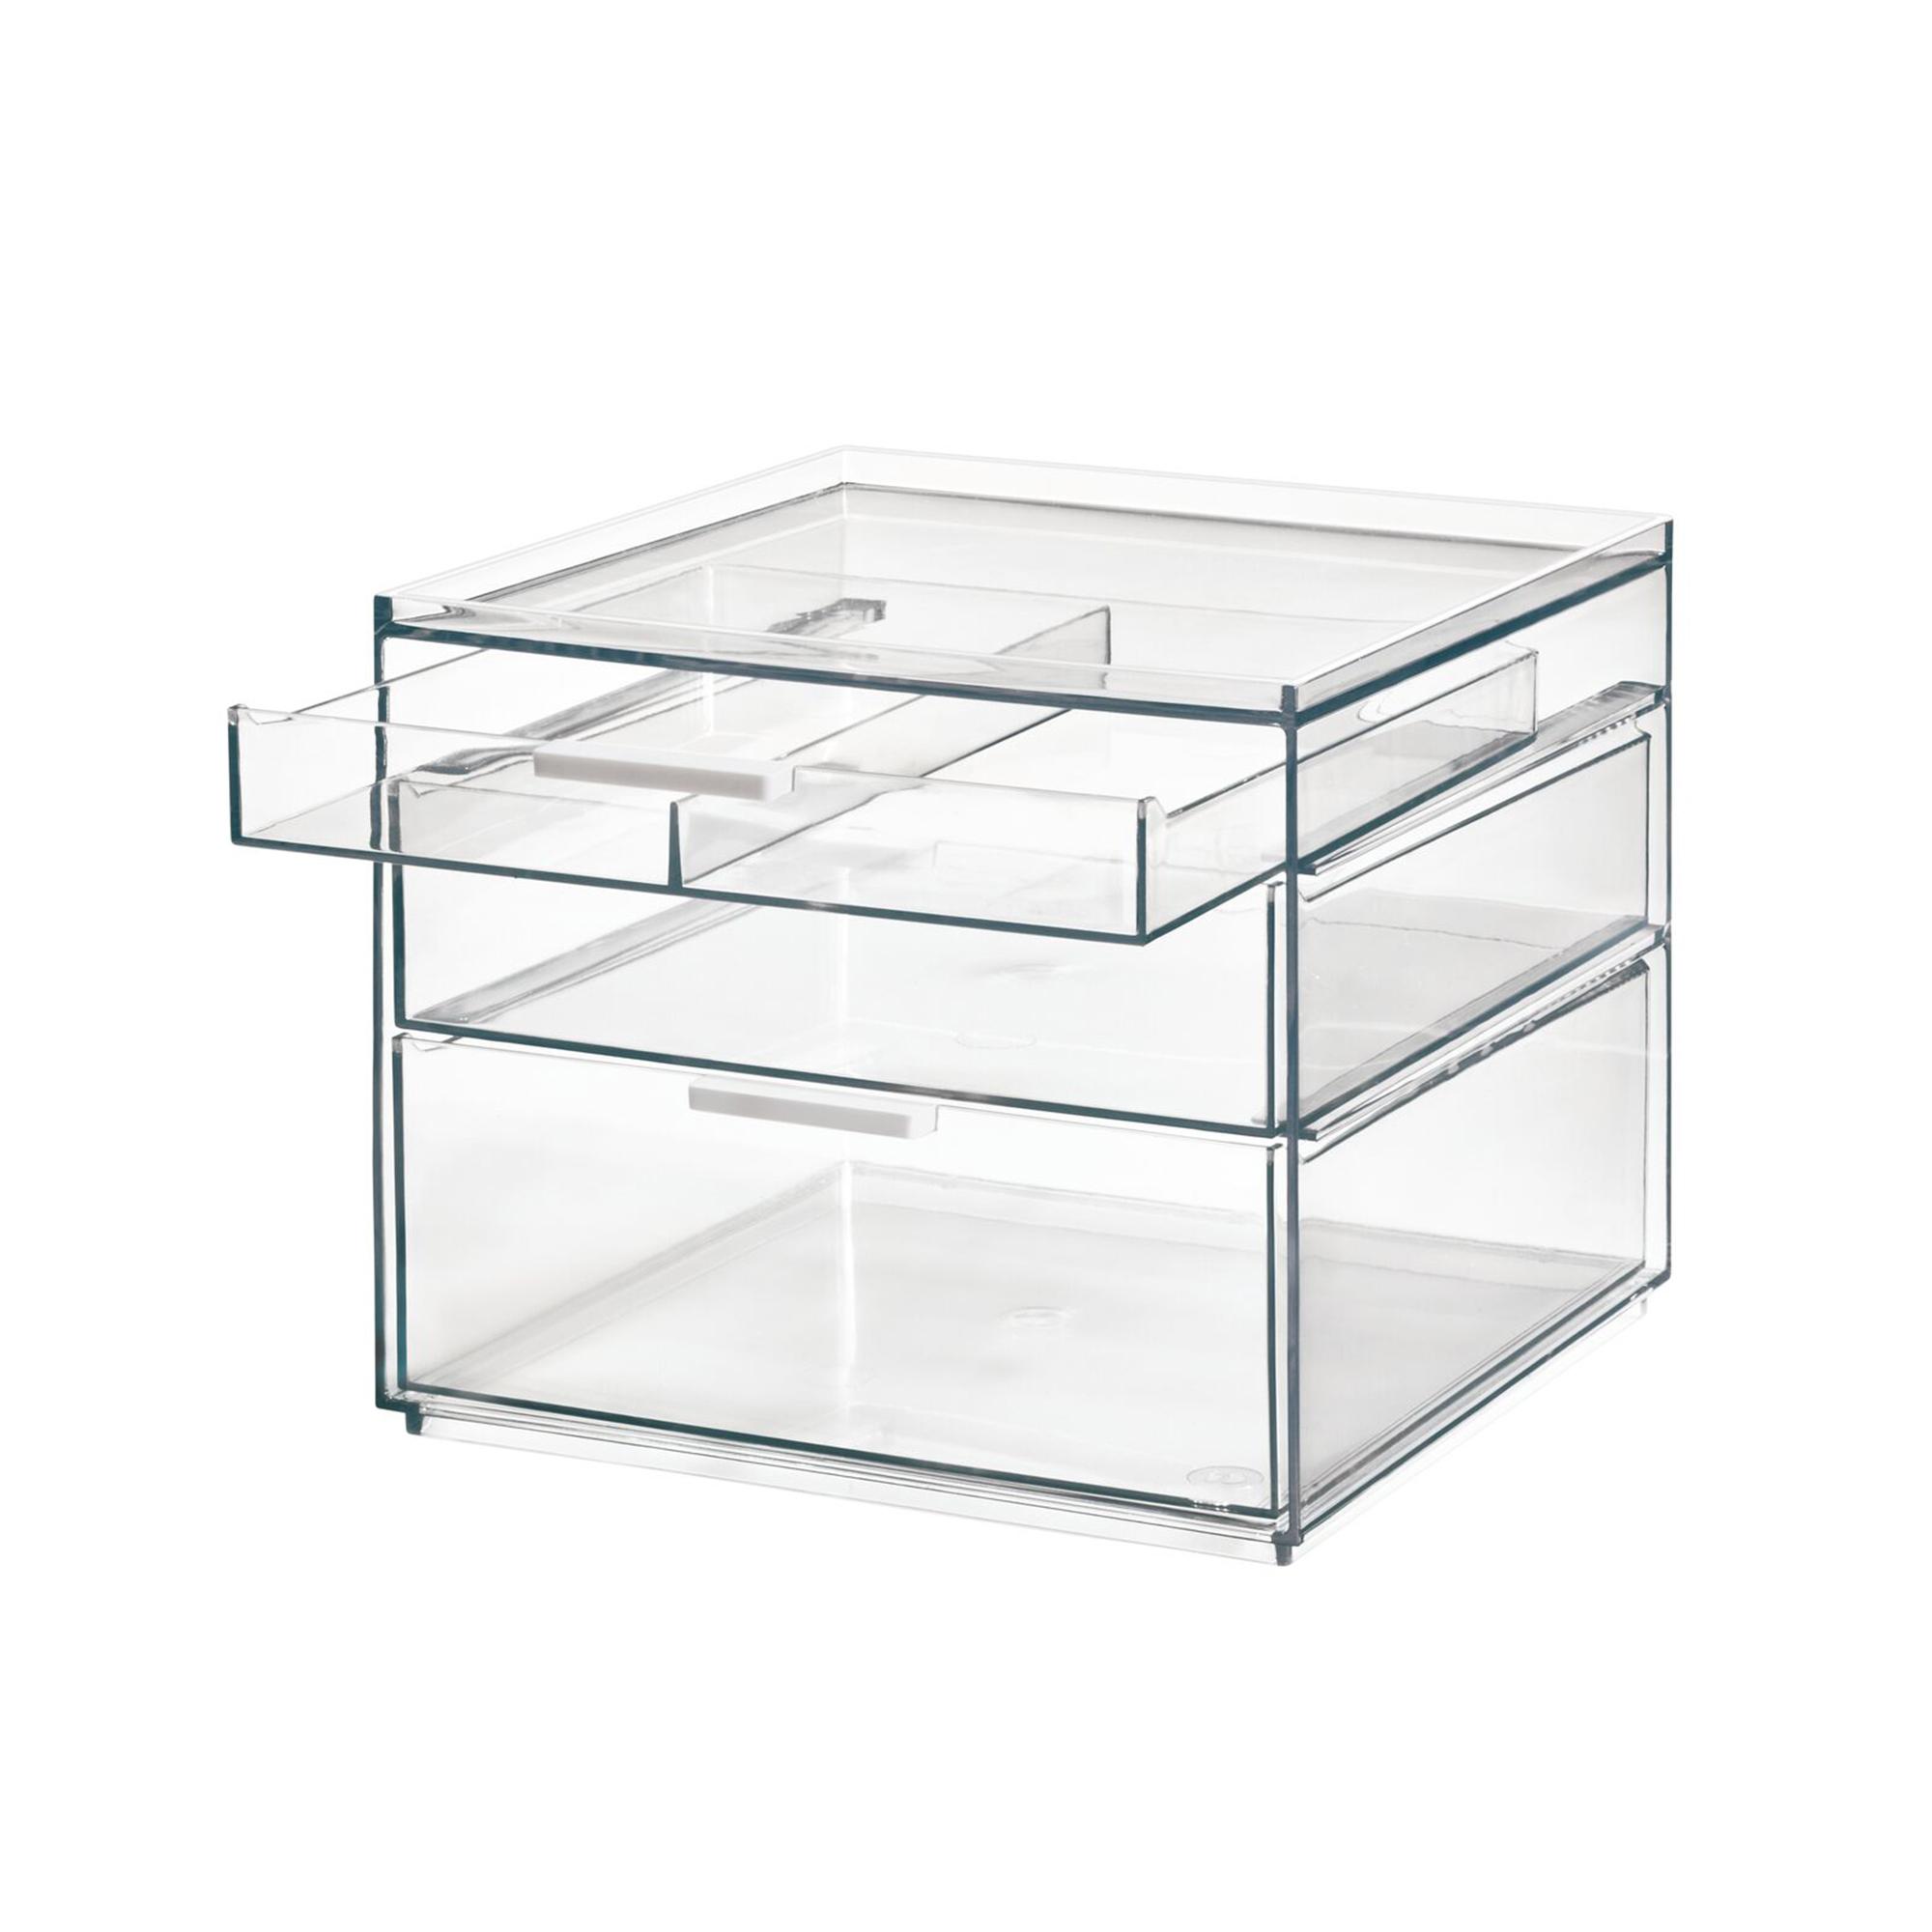 Sarah Tanno by iDesign 3 Drawer Cosmetic Organiser Clear Image 5